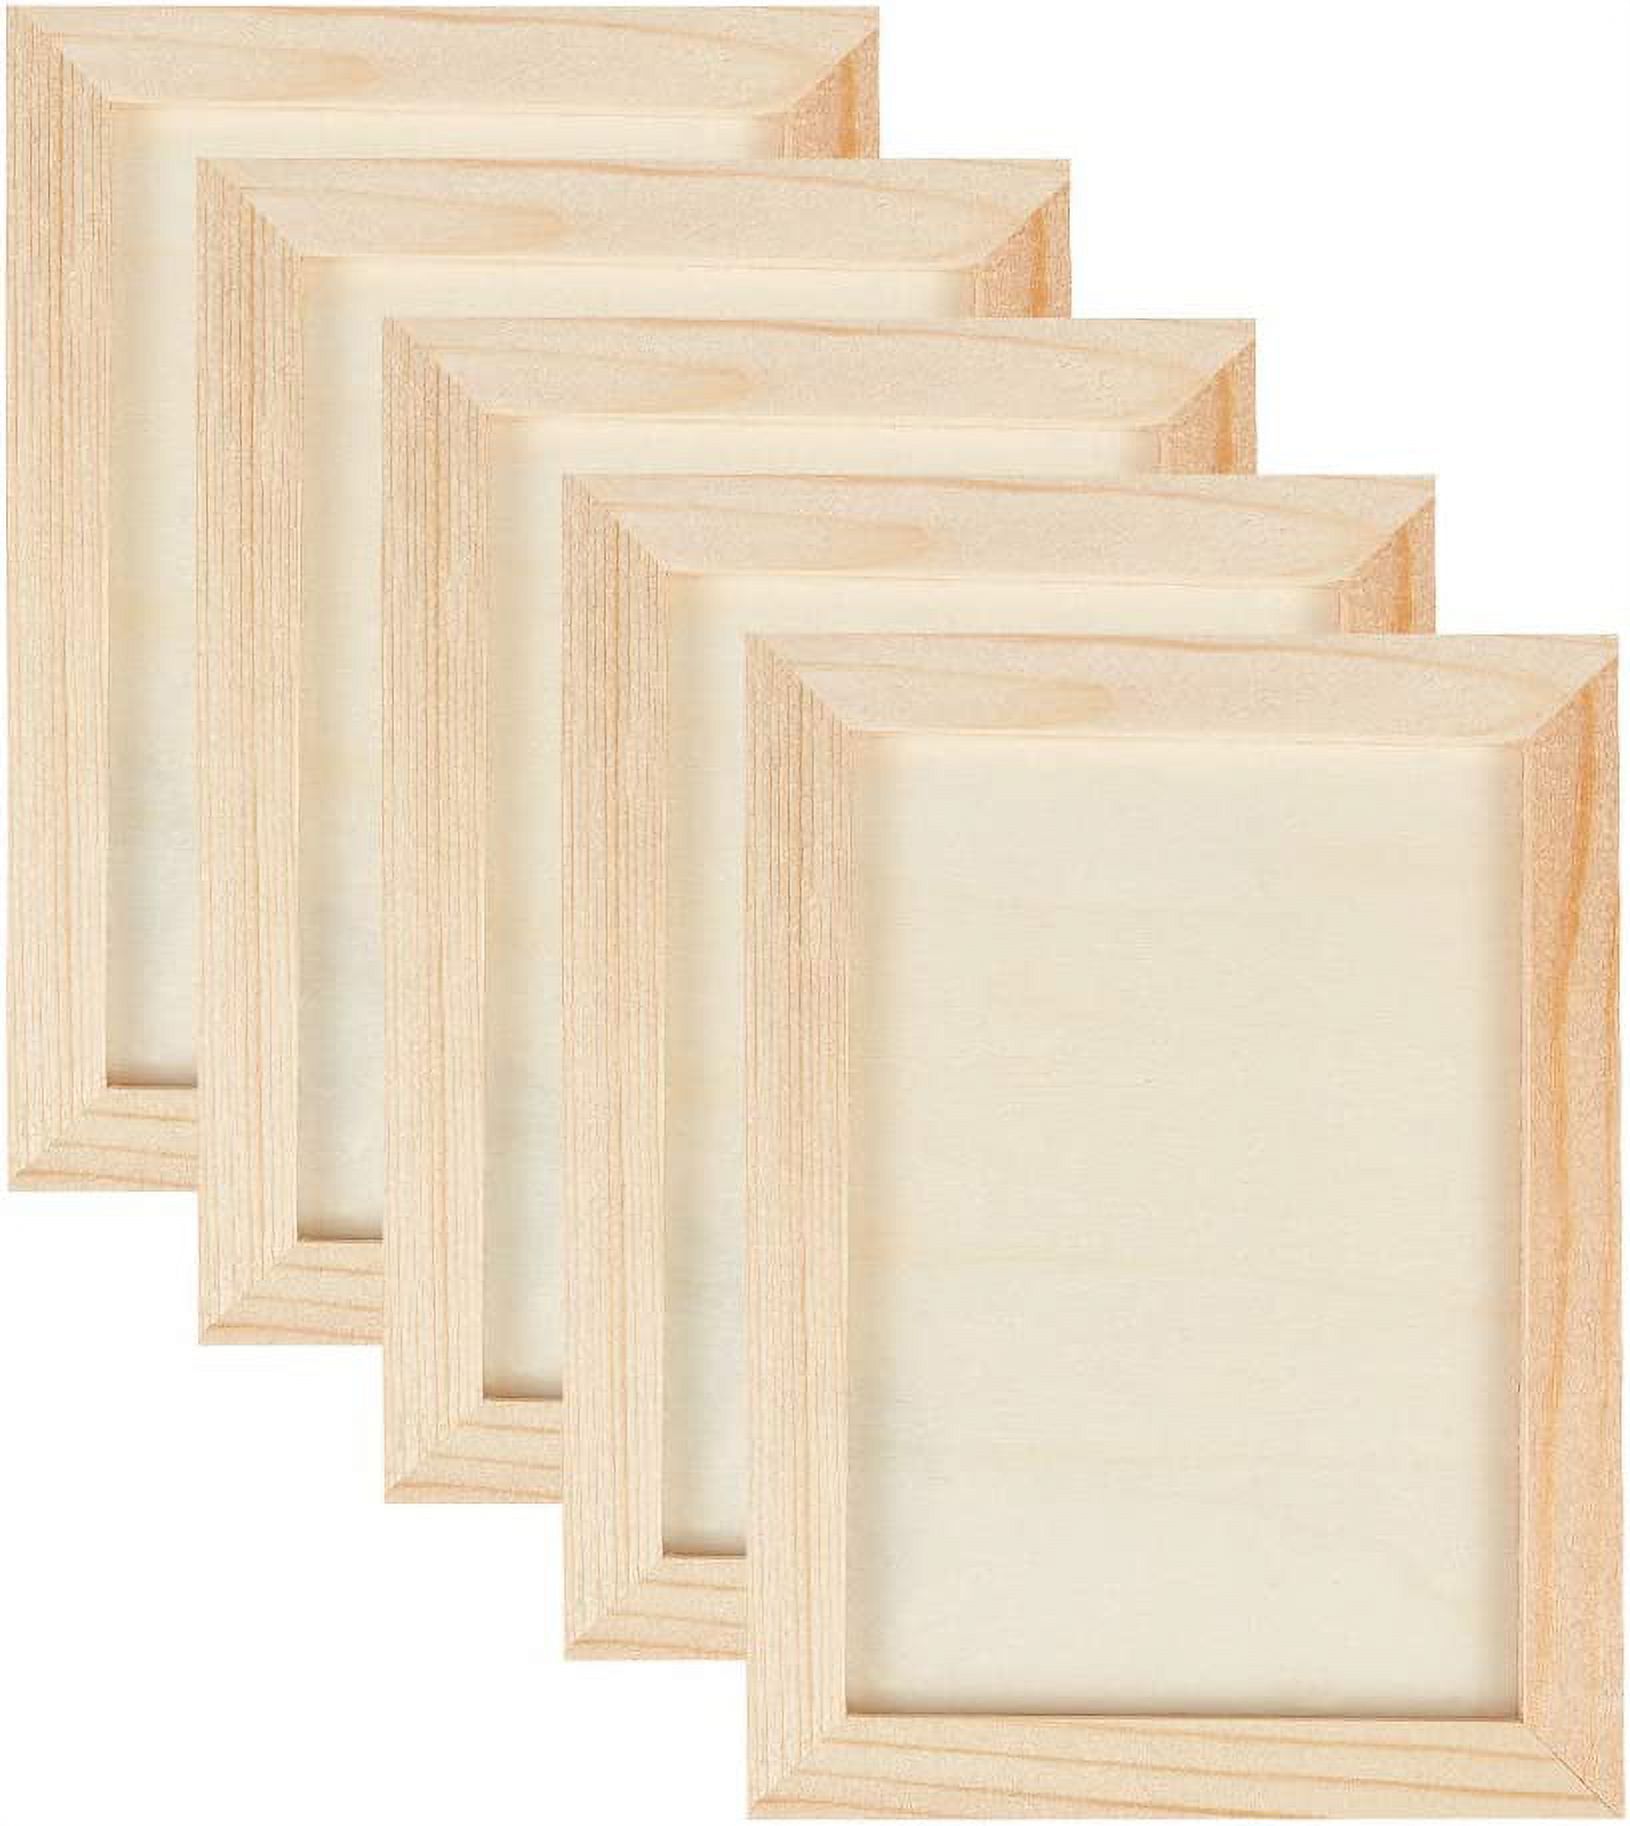 10pcs Wood Canvas Boards 5”x7” Unfinished Wood Painting Boards, Wooden Paint  Pouring Panel Boards for Painting, Clay Crafting, Art and Crafts 